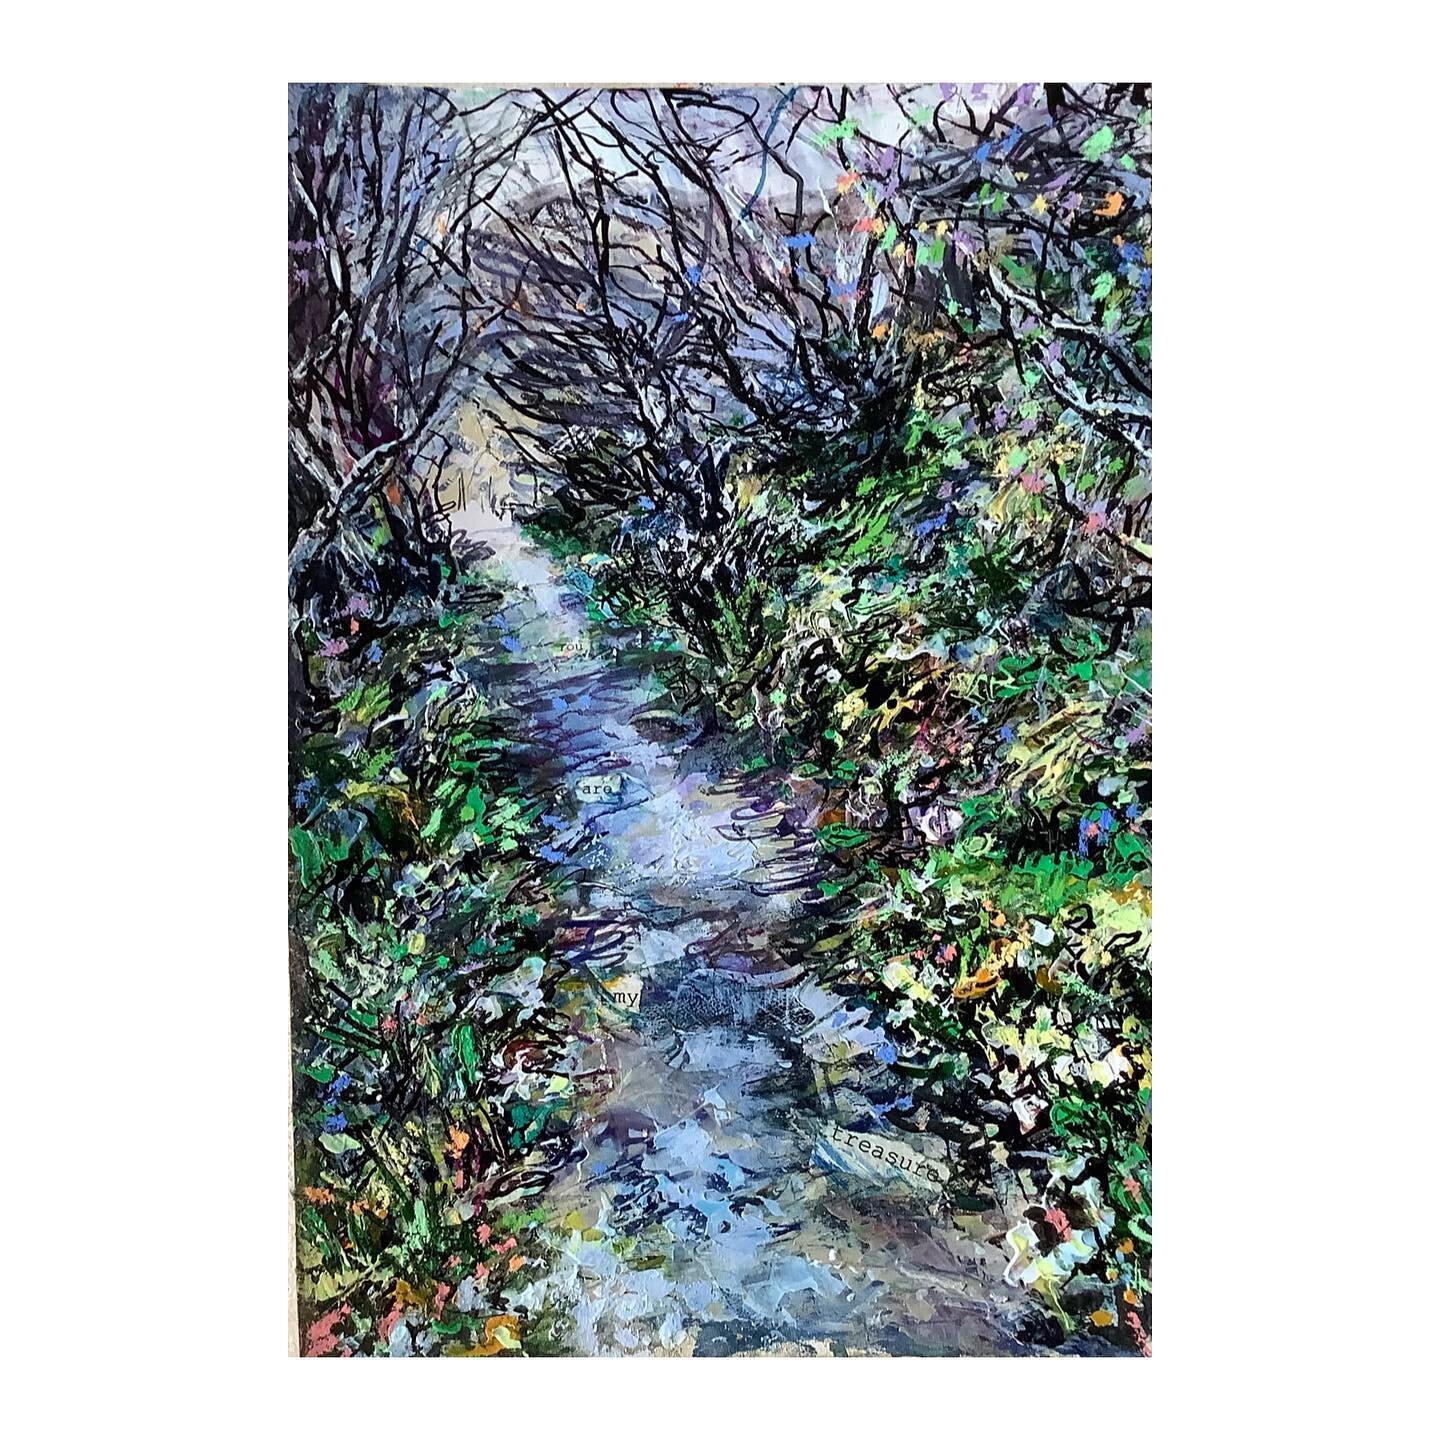 &lsquo;Leave No Path&rsquo;, mixed media on board 27cm x 19cm

A series of paintings towards a commission from @fionatrevitt.photography. Here is the shadowy path to the healing Loch Shianta. I just loved Fiona&rsquo;s photo that highlighted the twis